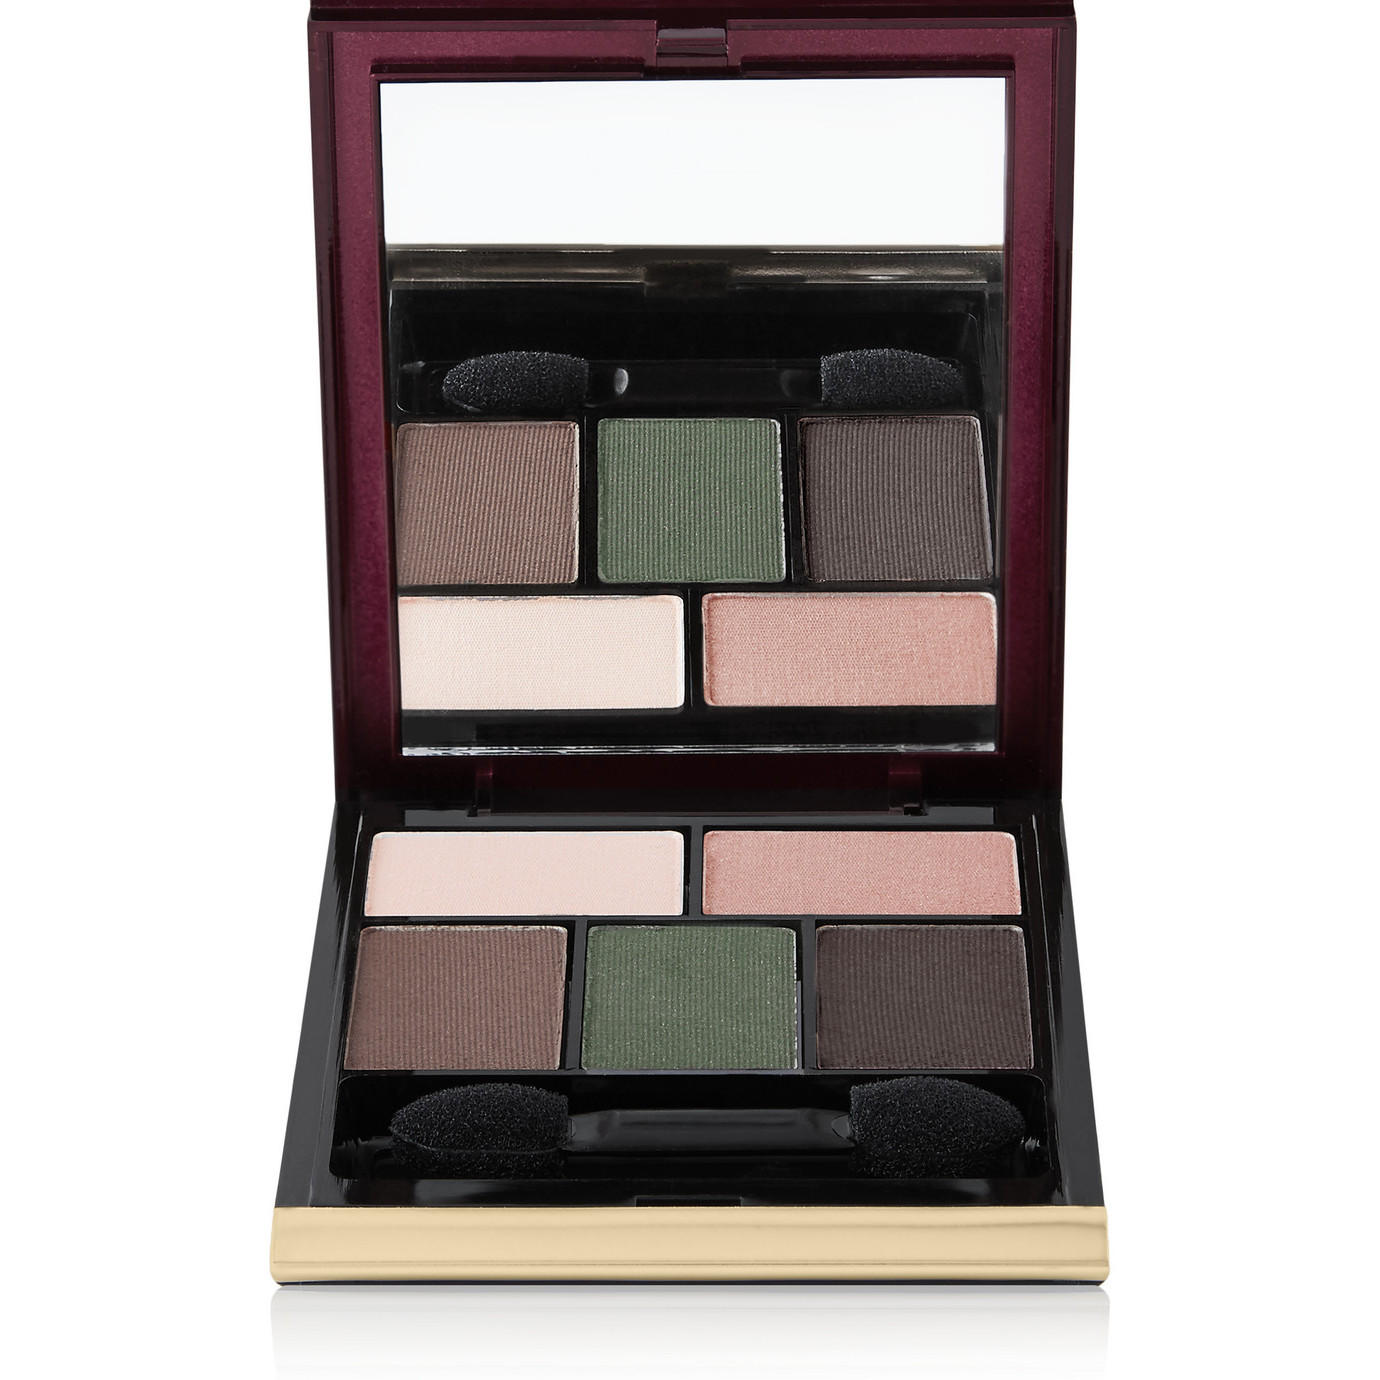 Kevyn Aucoin The Essential Eyeshadow Set The Featherlights Palette